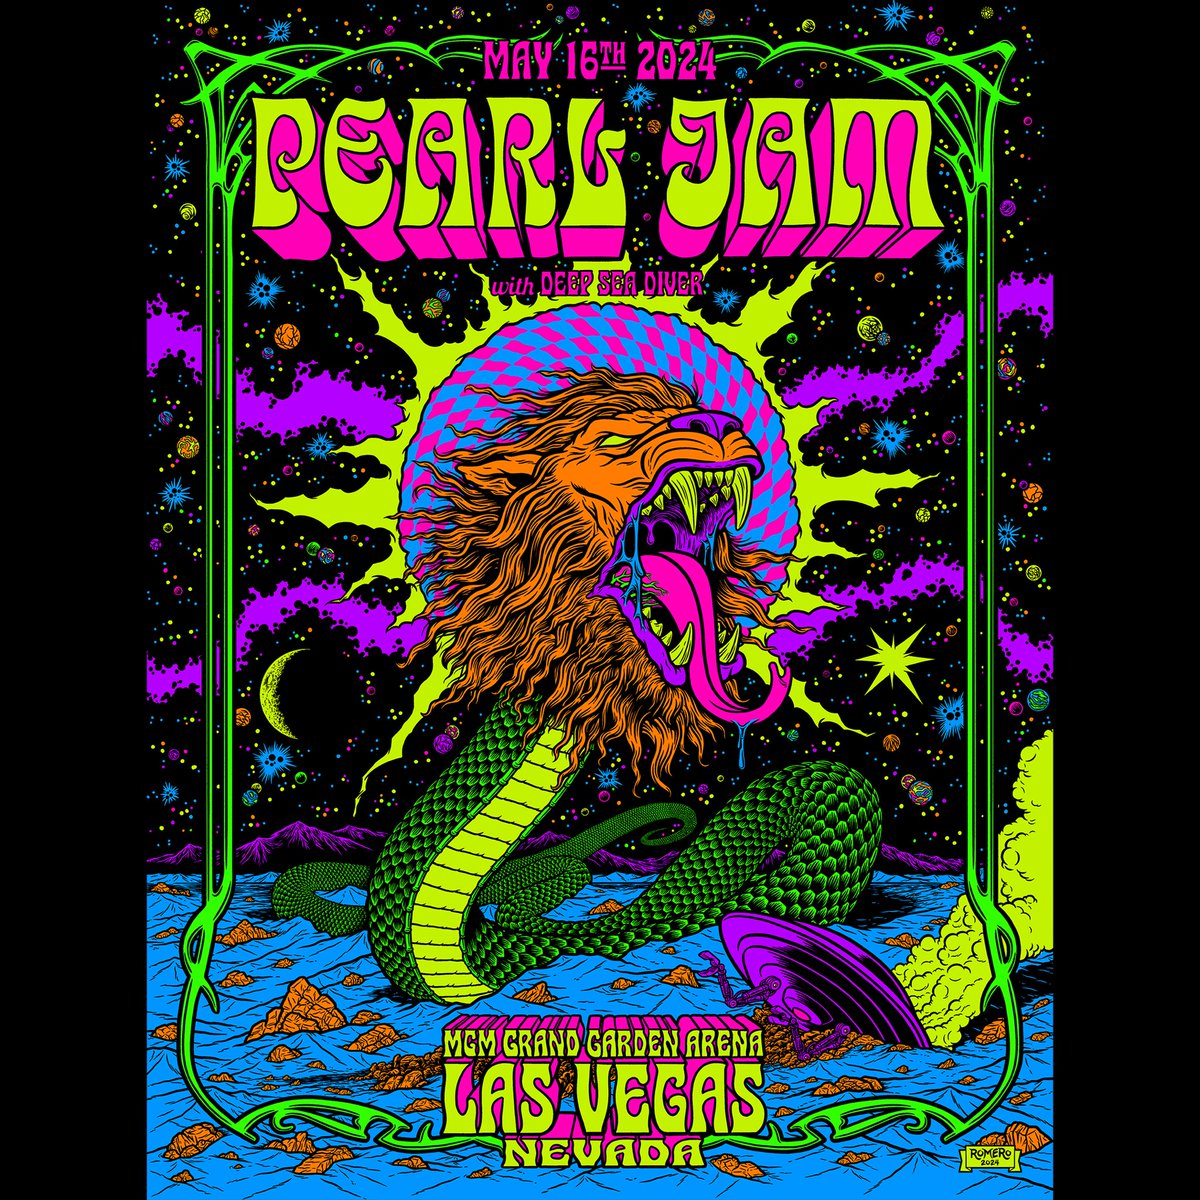 Signed and numbered artist proofs with variant color will go on sale tomorrow at 8pm EST:

brianromero.com/store

#pearljam #gigposter #concertposter #psychedelicart